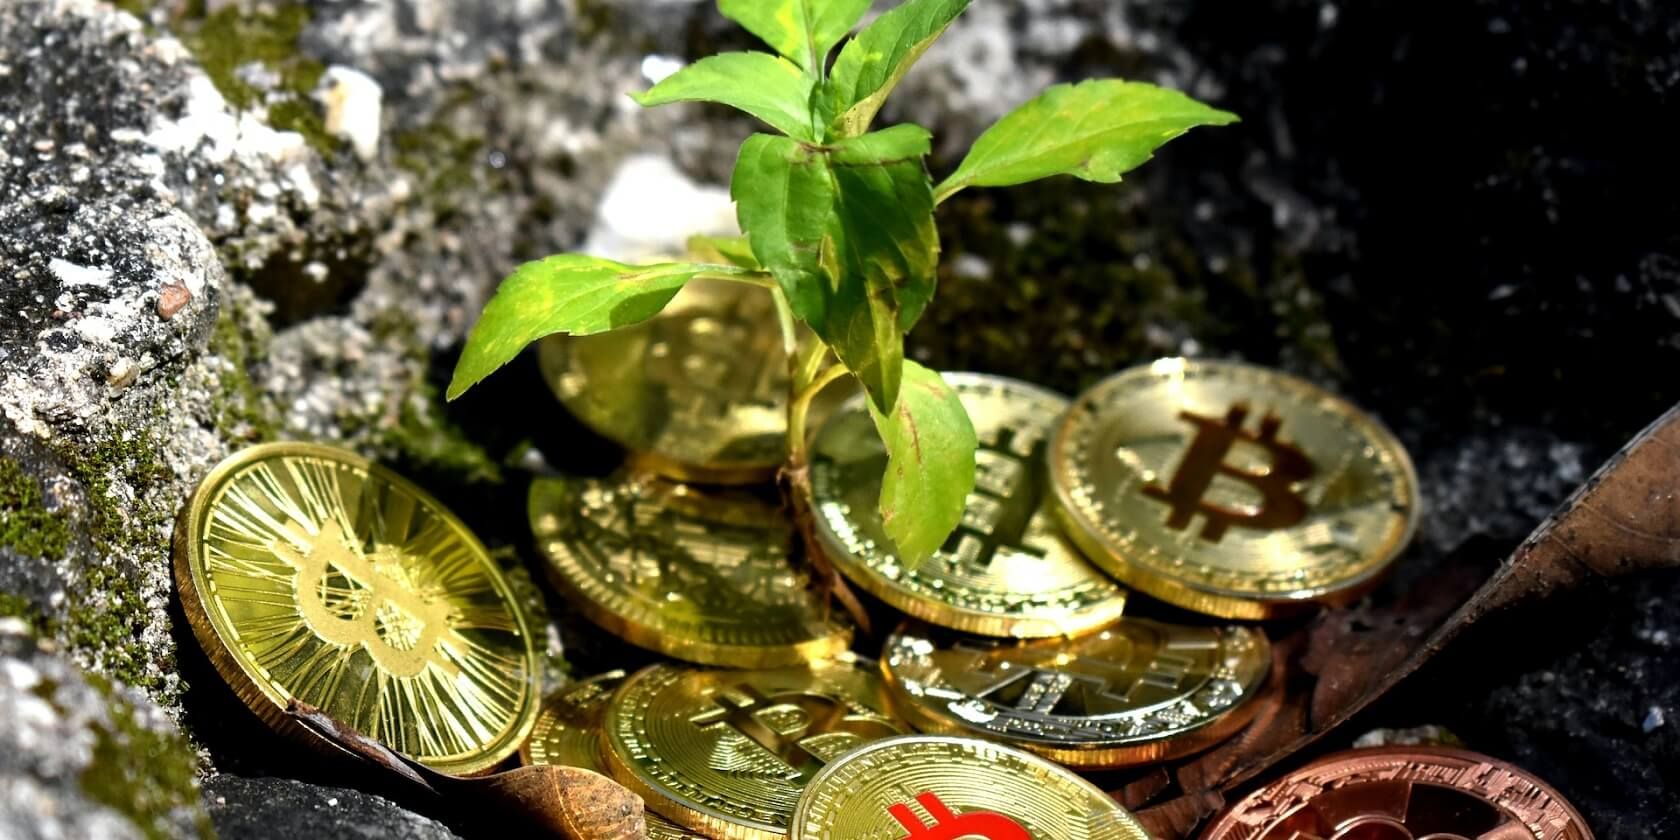 Young plant growing from ground covered with cryptocurrencies